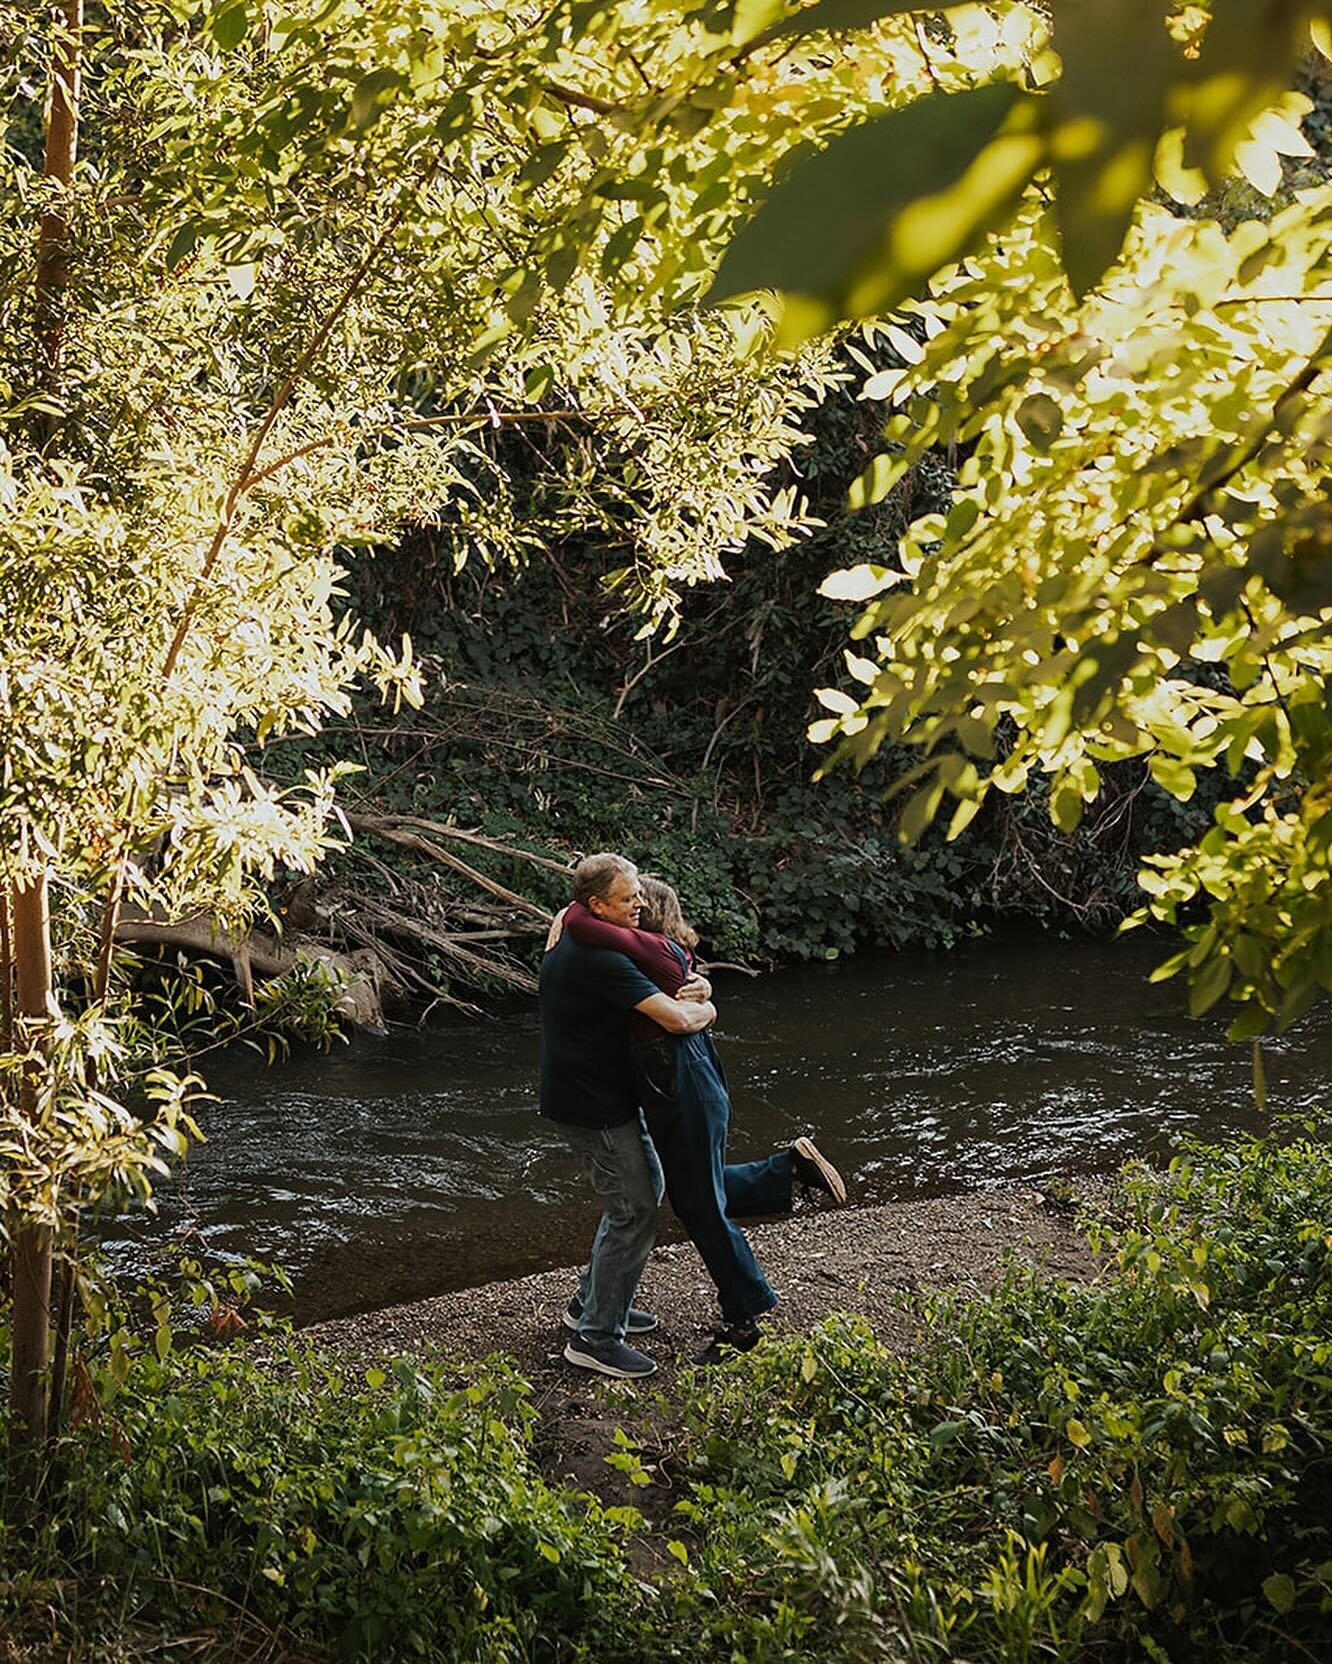 Catherine made me laugh when she mentioned during our session, that she&rsquo;d love to see these photos up amongst my other work in destinations like Yosemite, Big Sur, etc - showing that even a local spot, like along San Leandro Creek, can be a gor